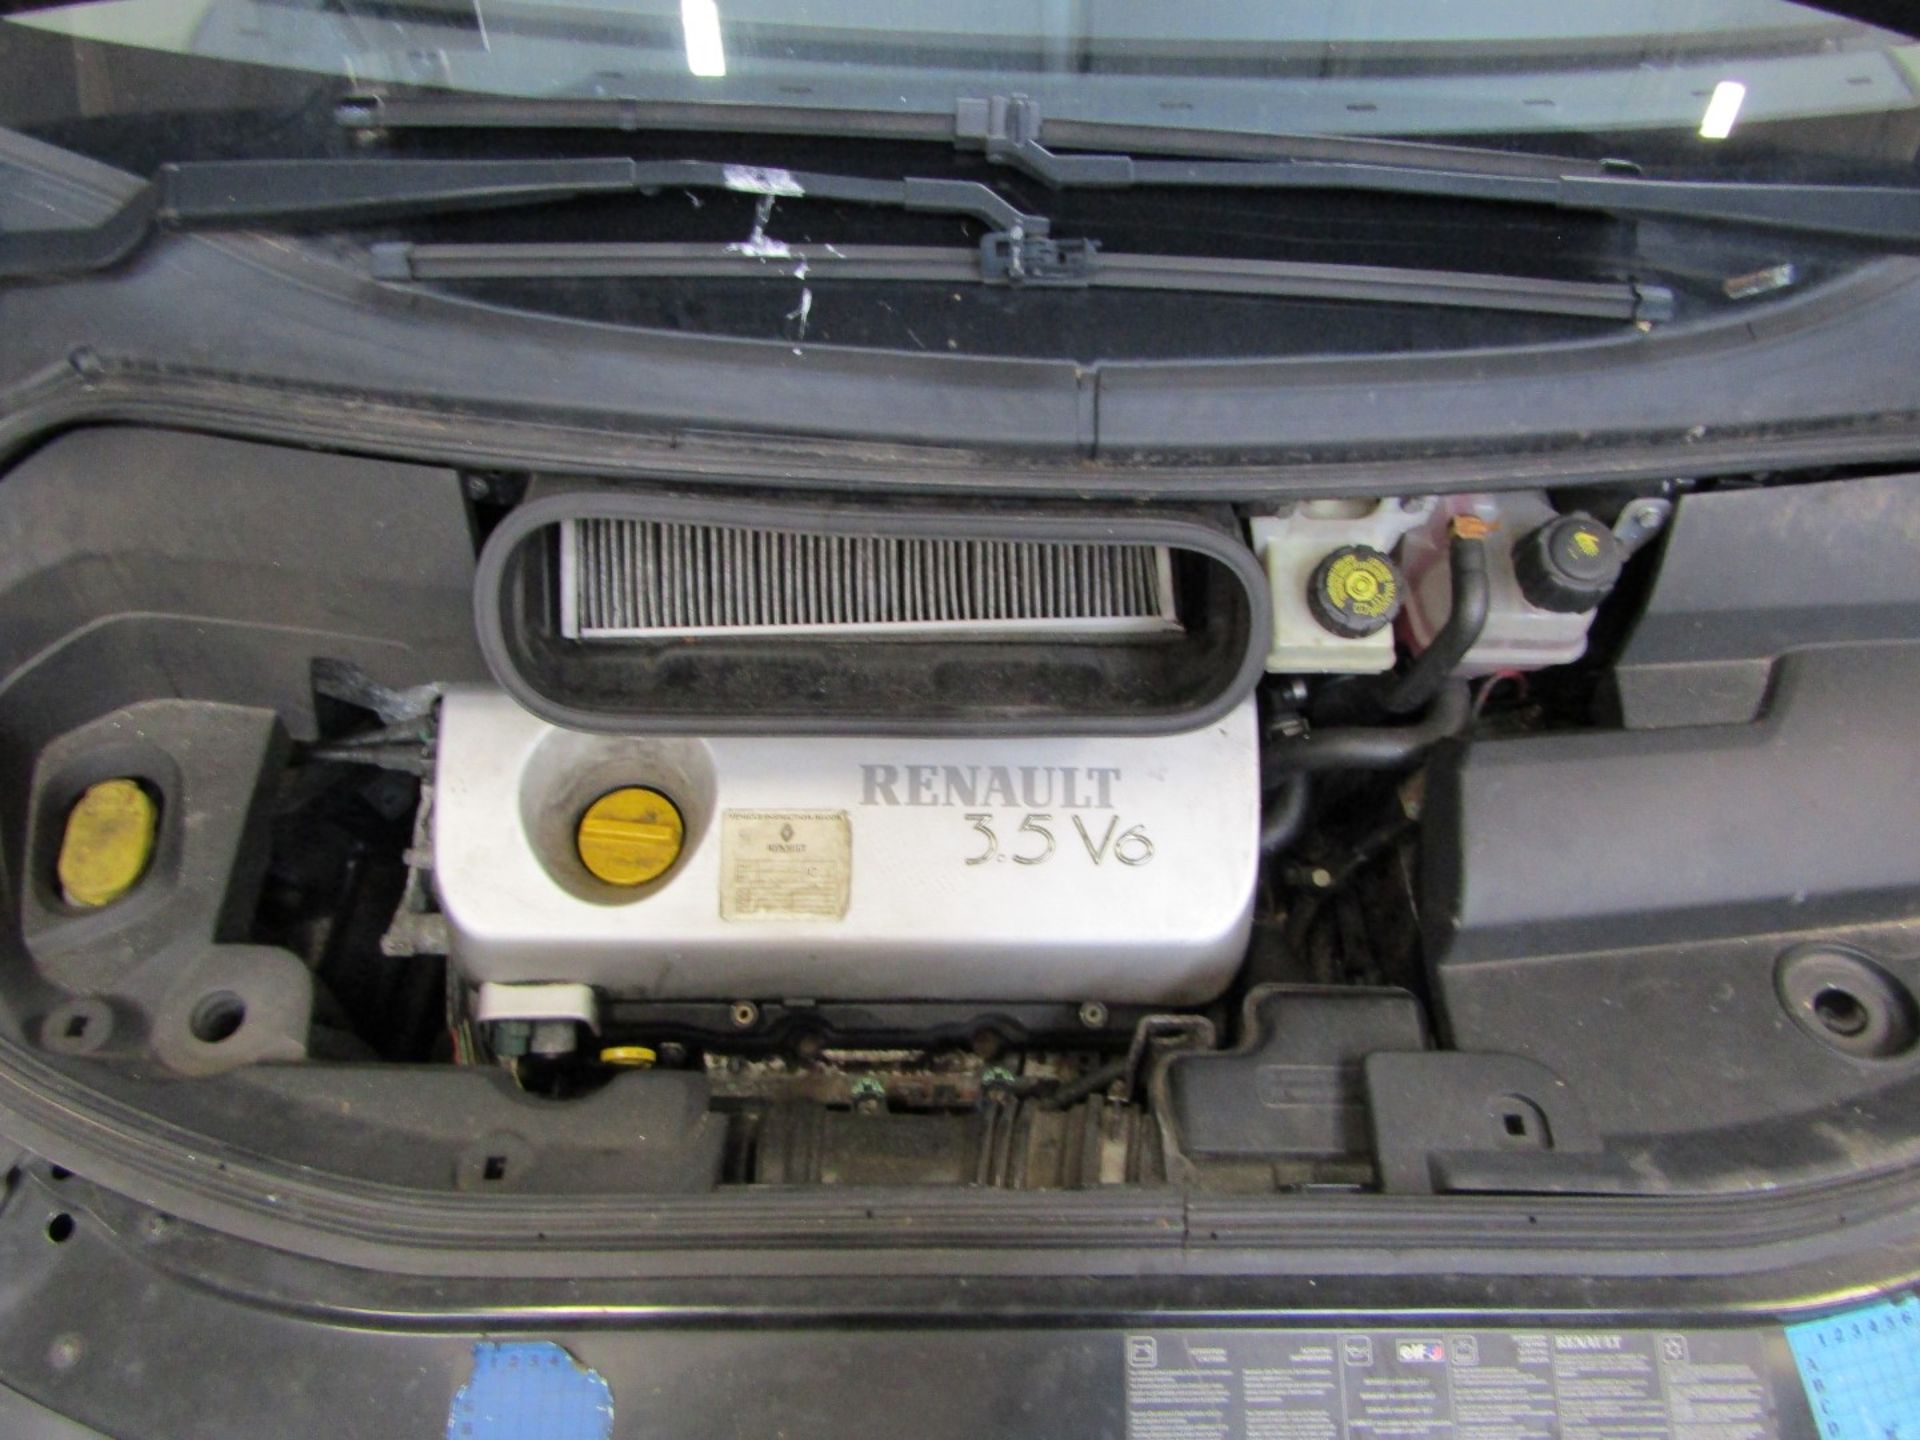 04 04 Renault Espace Initiale V6 - Image 3 of 27